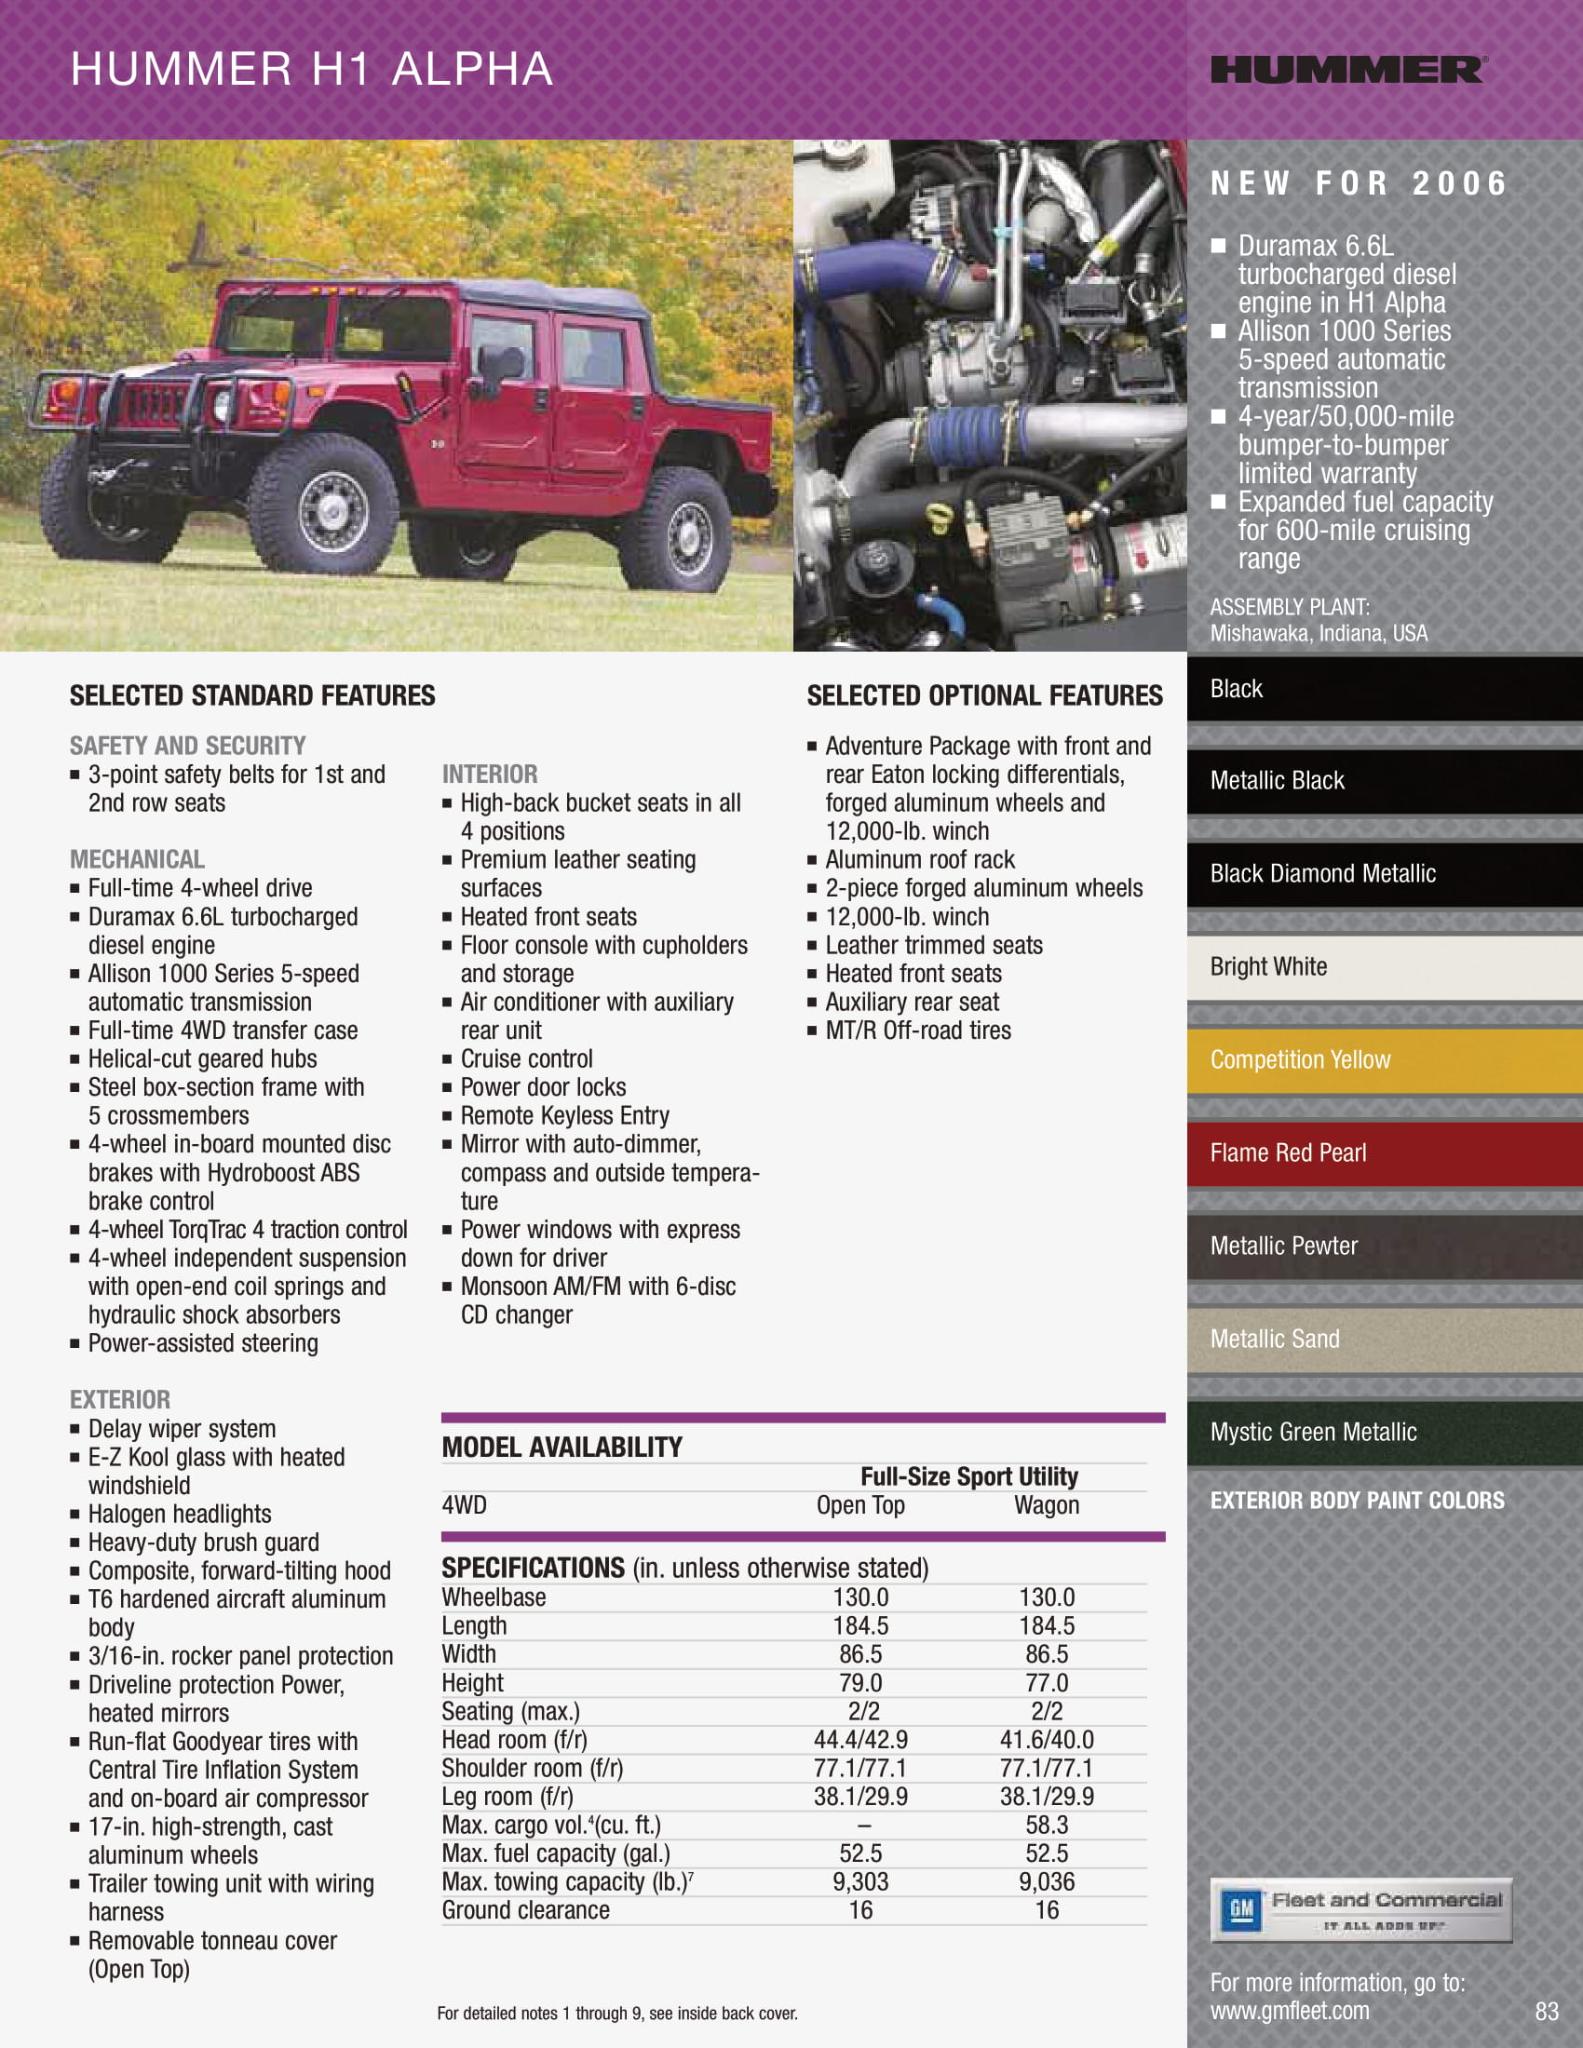 Colors used on Hummer H1 Vehicles in 2006